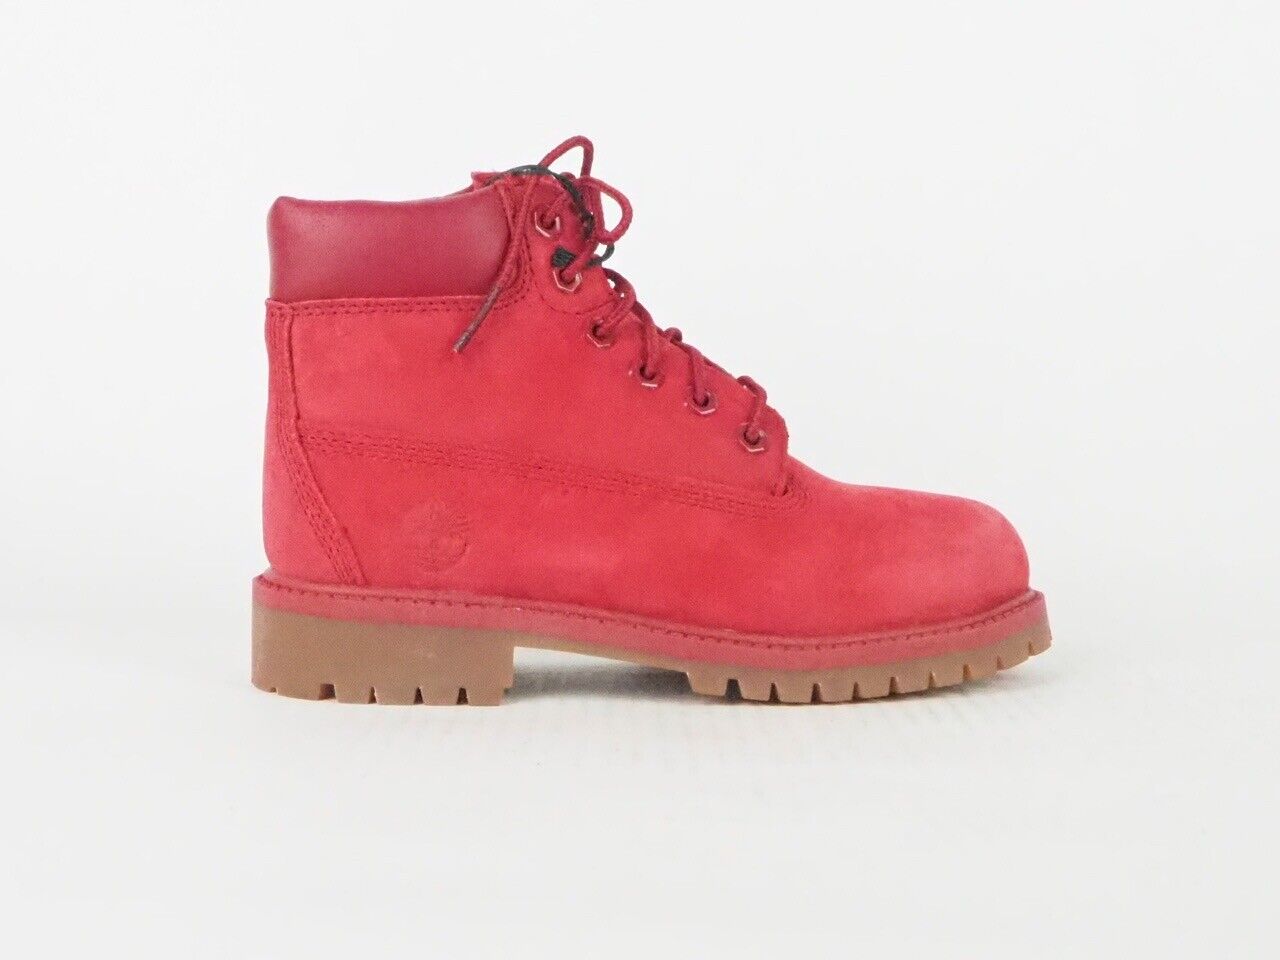 Girls Timberland Classic Premium 6 Inch A14TE Red Leather Lace Waterproof Boots